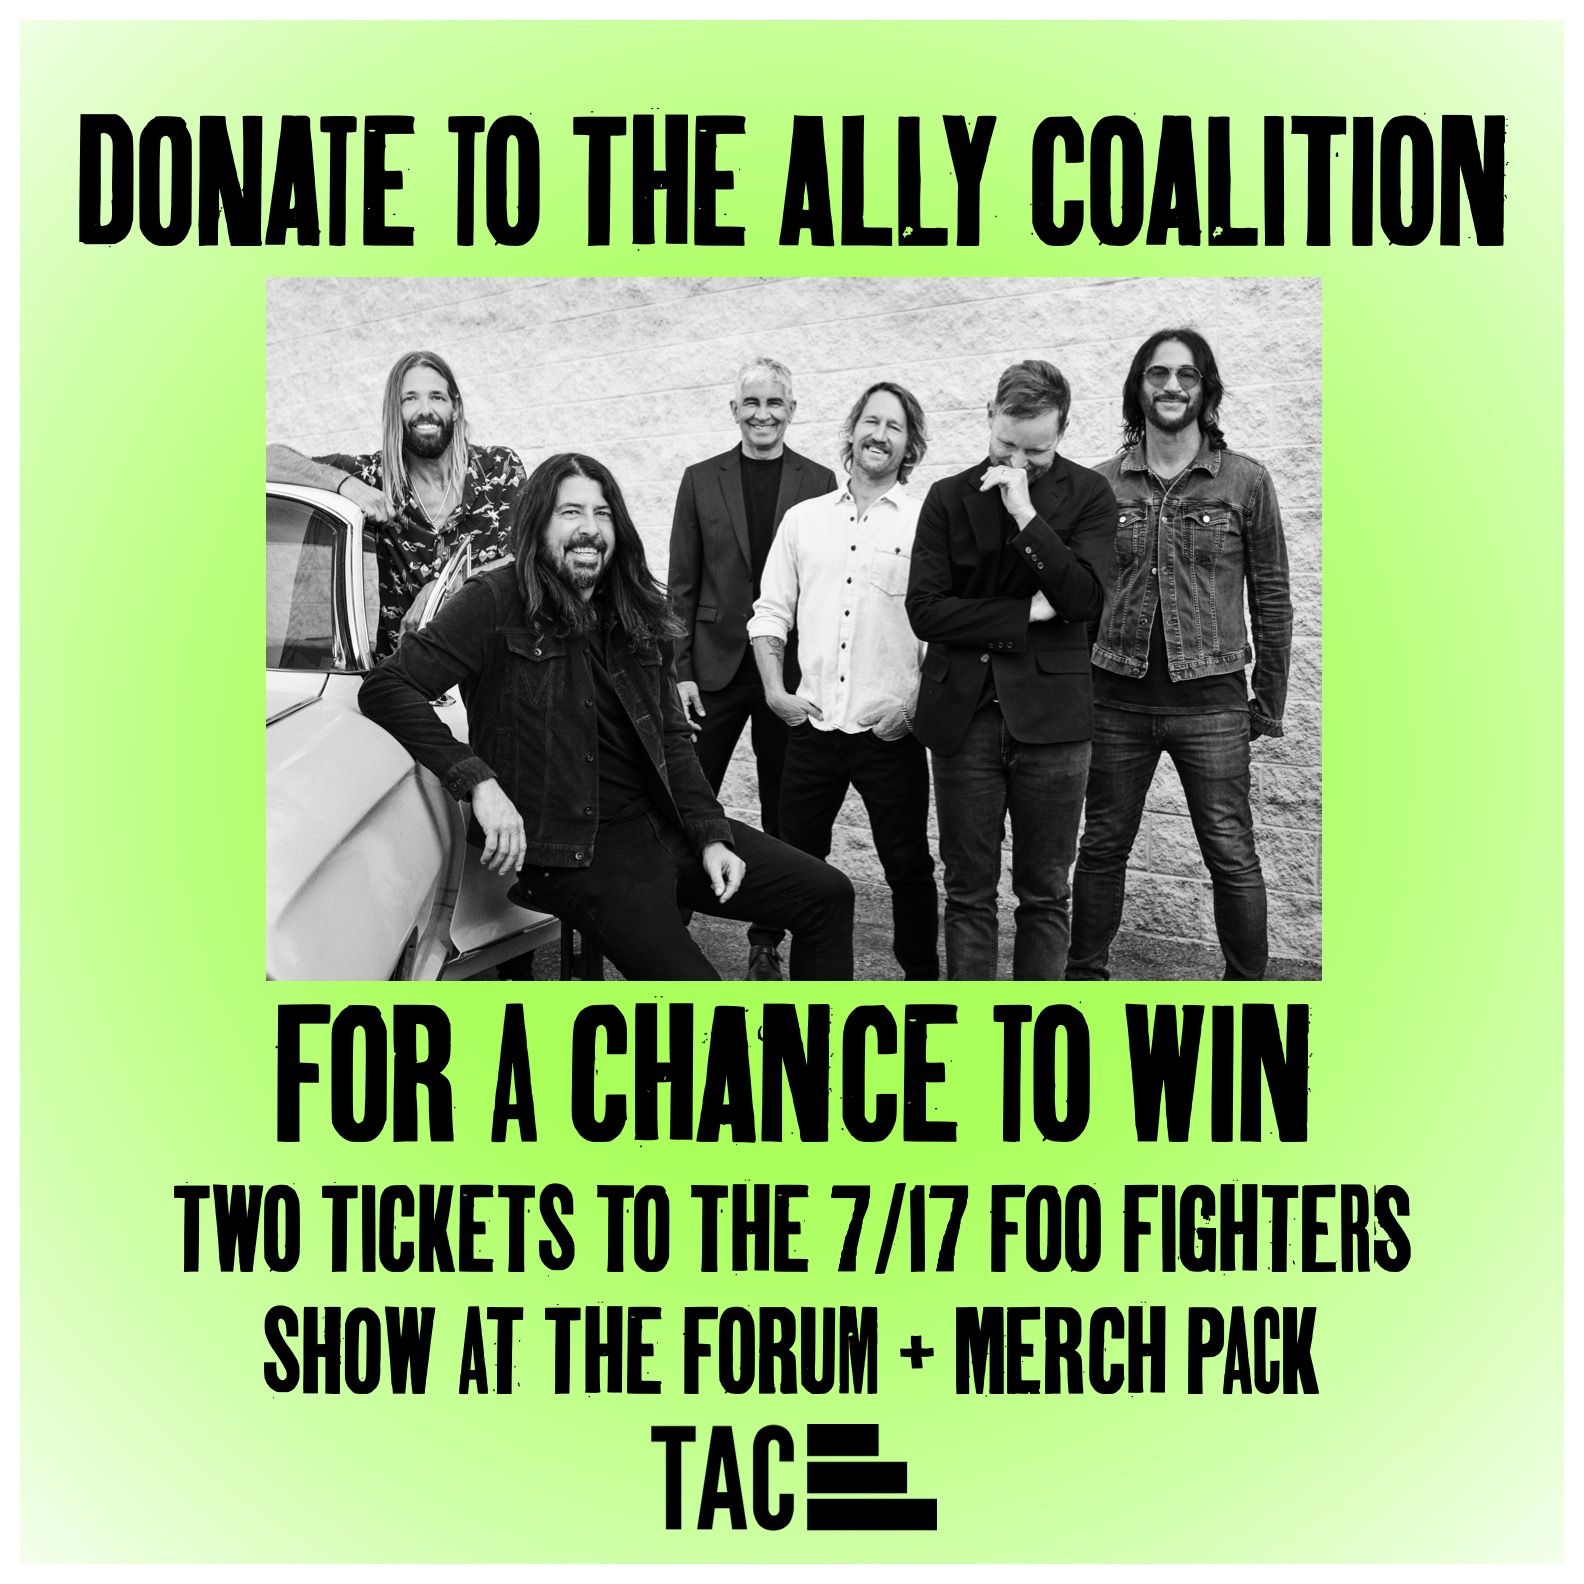 Foo Fighters Campaign